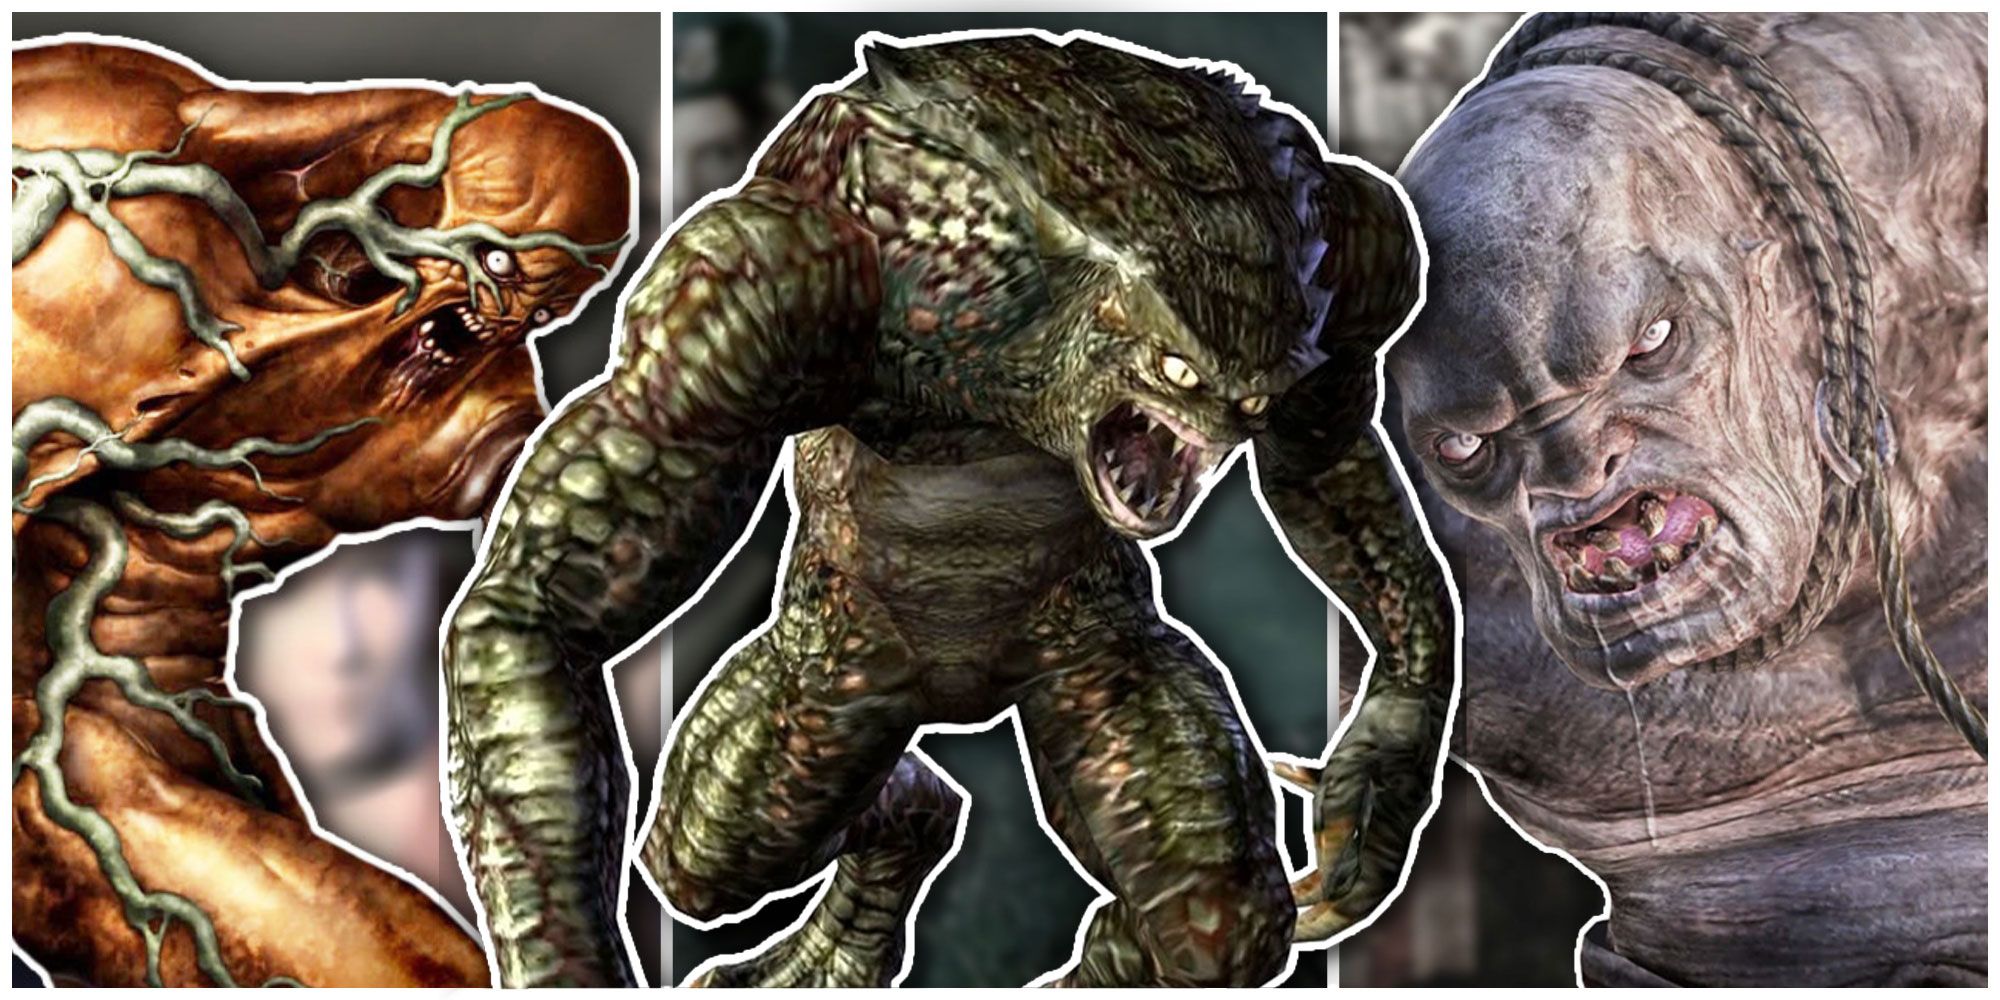 3 monsters from the Resident Evil franchise,  Bandersnatch, Hunter and El Gigante